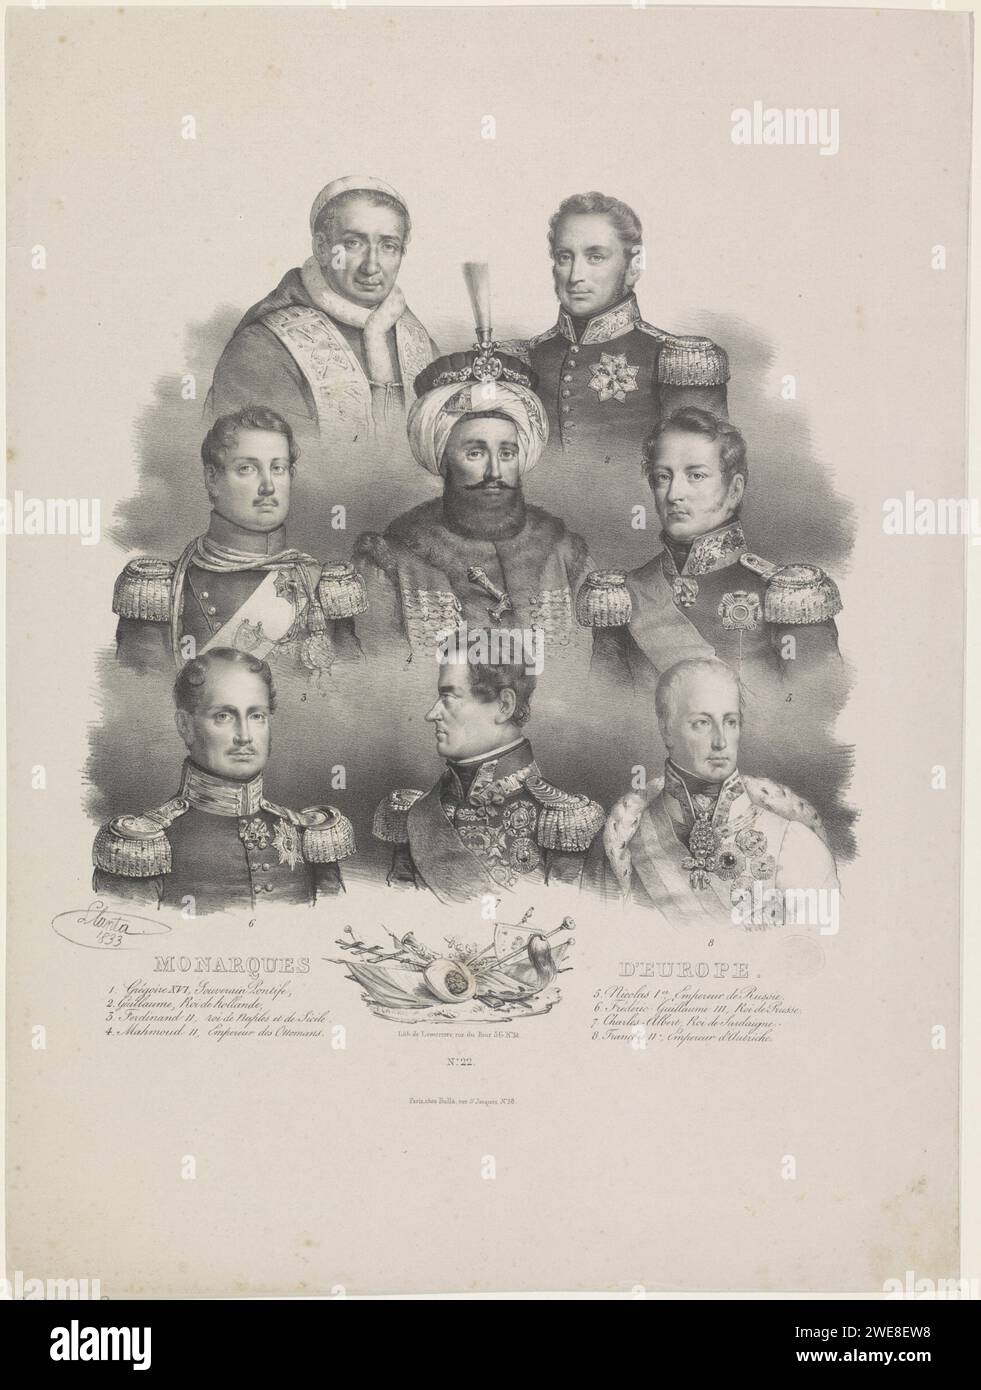 Portraits of eight princes of Europe, Jacques François Gauderique Llanta, 1833 print Portraits of Pope Gregorius XVI, William I (King of the Netherlands), Ferdinand II (King of both Siciliën), Mahmut II (Sultan of the Ottoman Empire), Nicolaas I Pavlovich (tsar of Russia), Frederik Willem III (King of Prussia) , Karel Albert (King of Sardinia) and Frans II (Roman-German Emperor) .. At the bottom left and bottom right an explanatory list. print maker: Franceprinter: Parispublisher: Paris paper Stock Photo